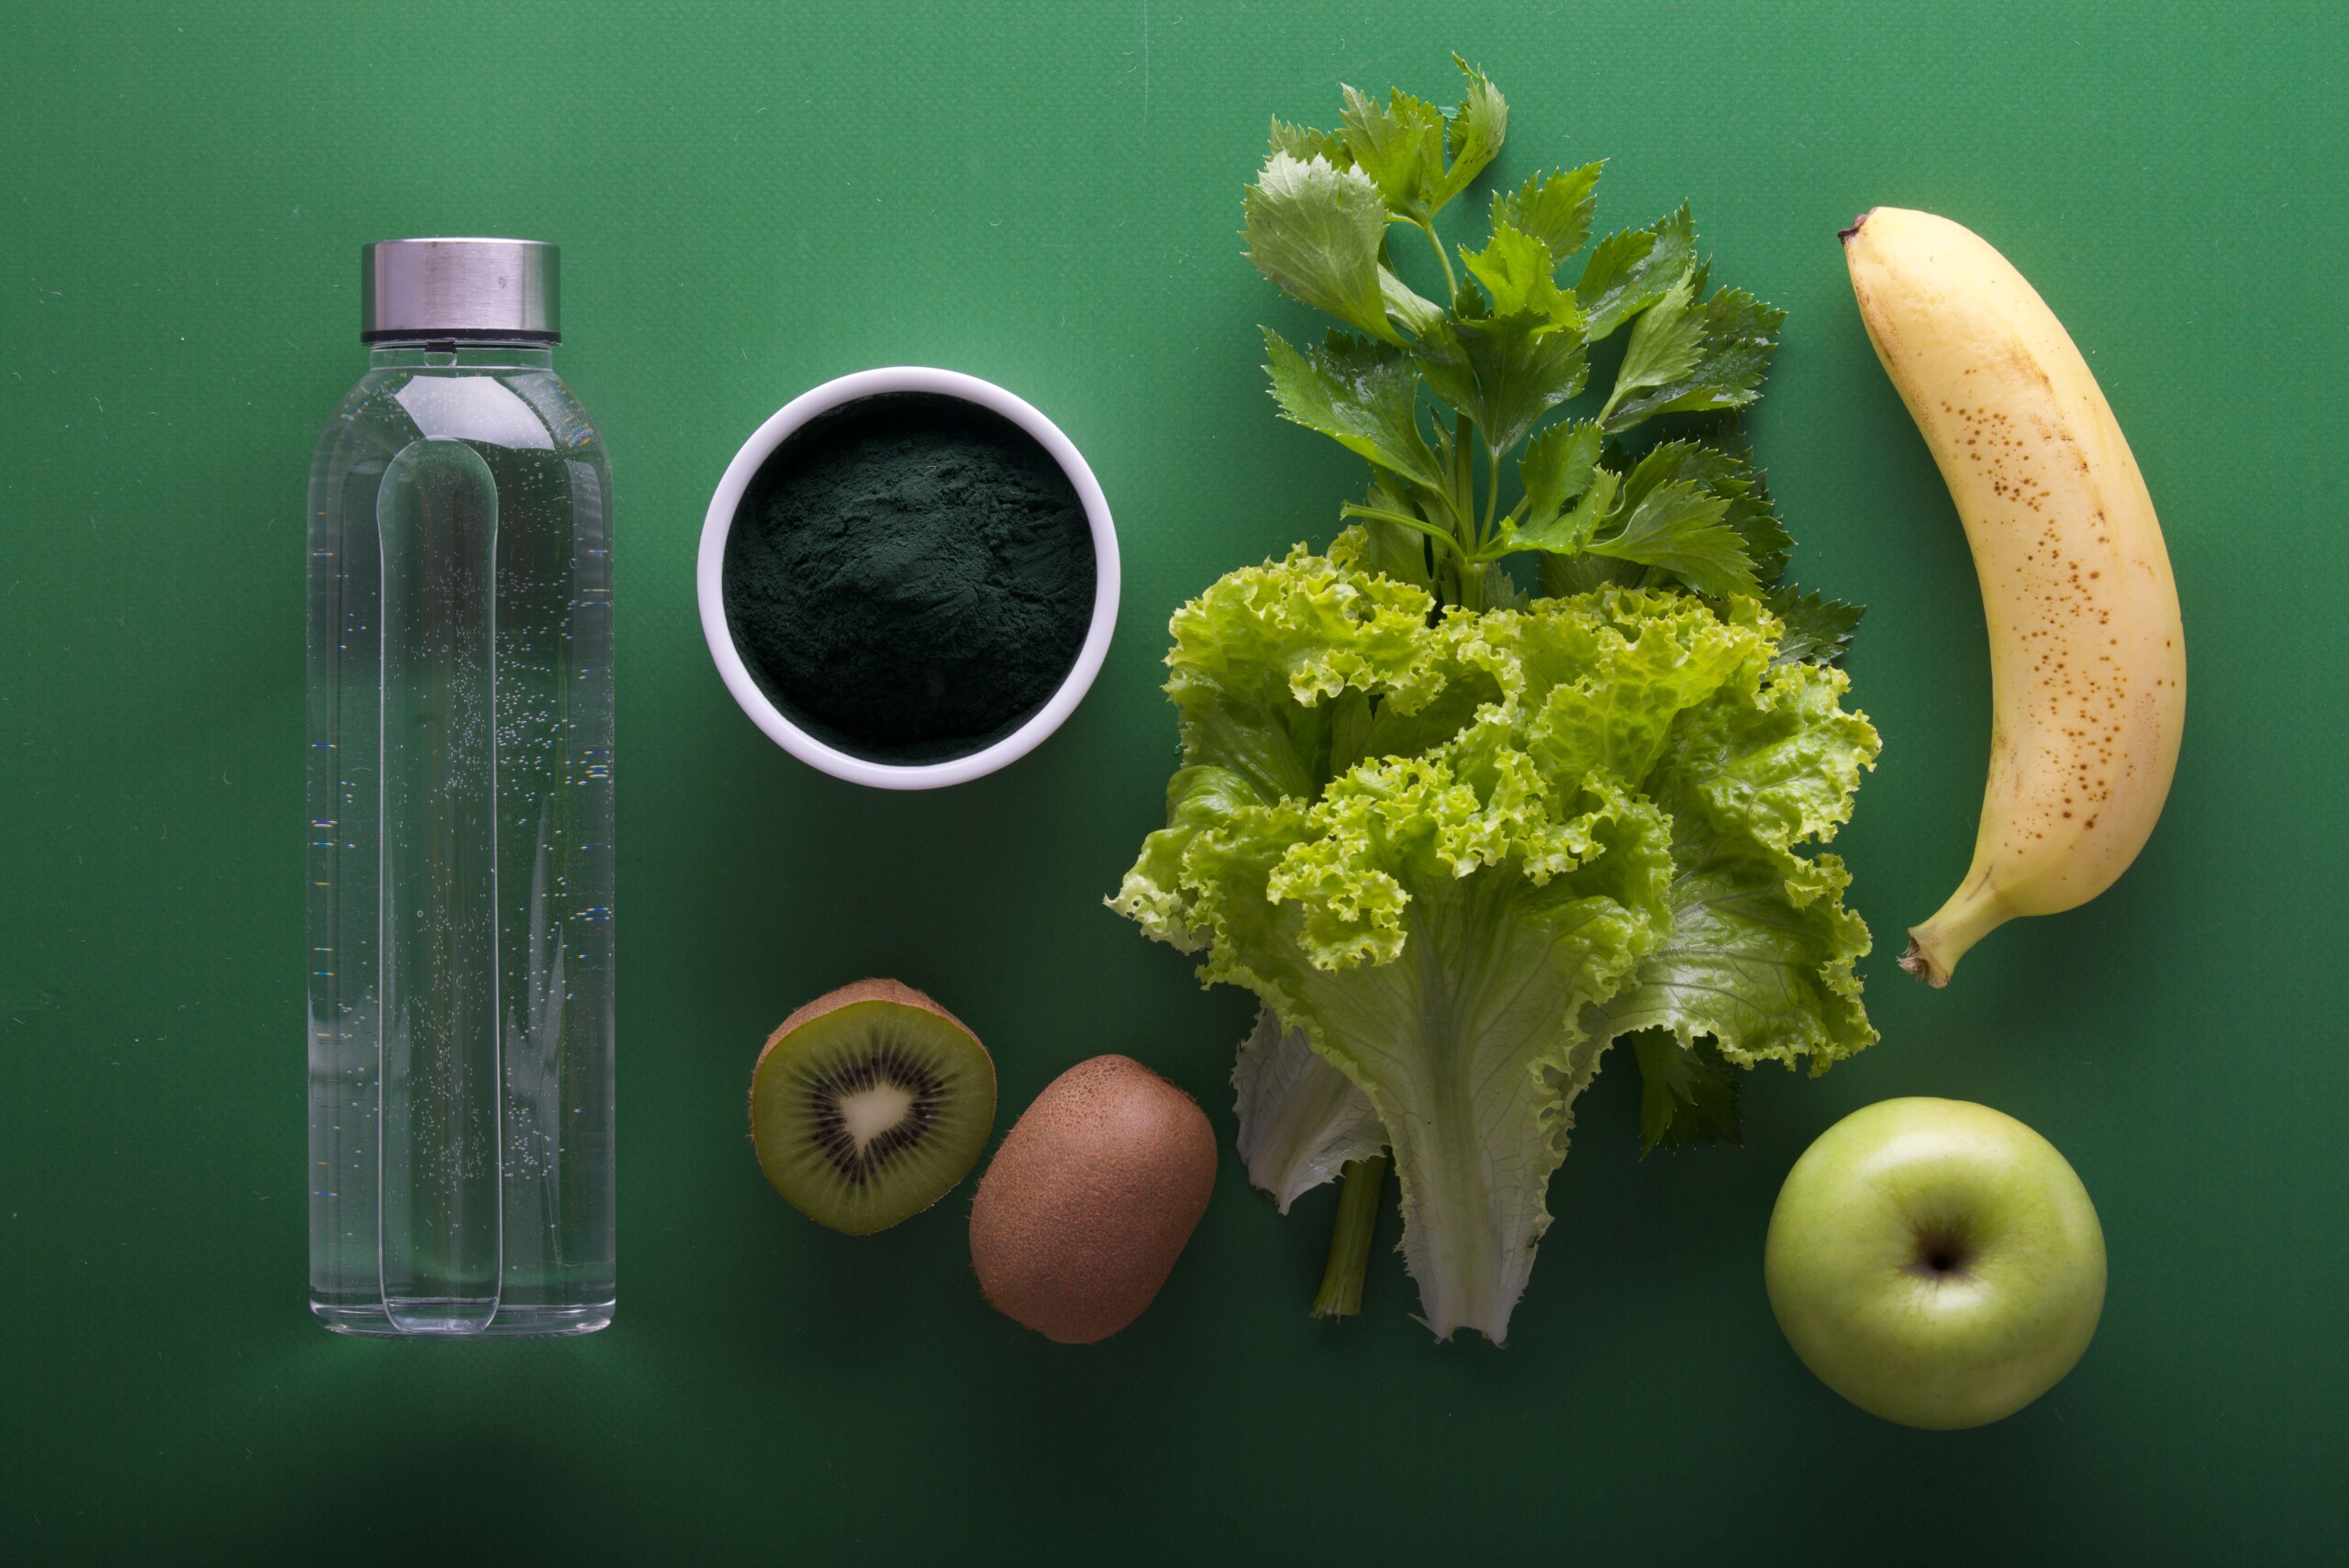 A bottle of water, a sliced kiwi, a wedge of Romaine lettuce, a granny smith apple, and a banana lined up on a green background.